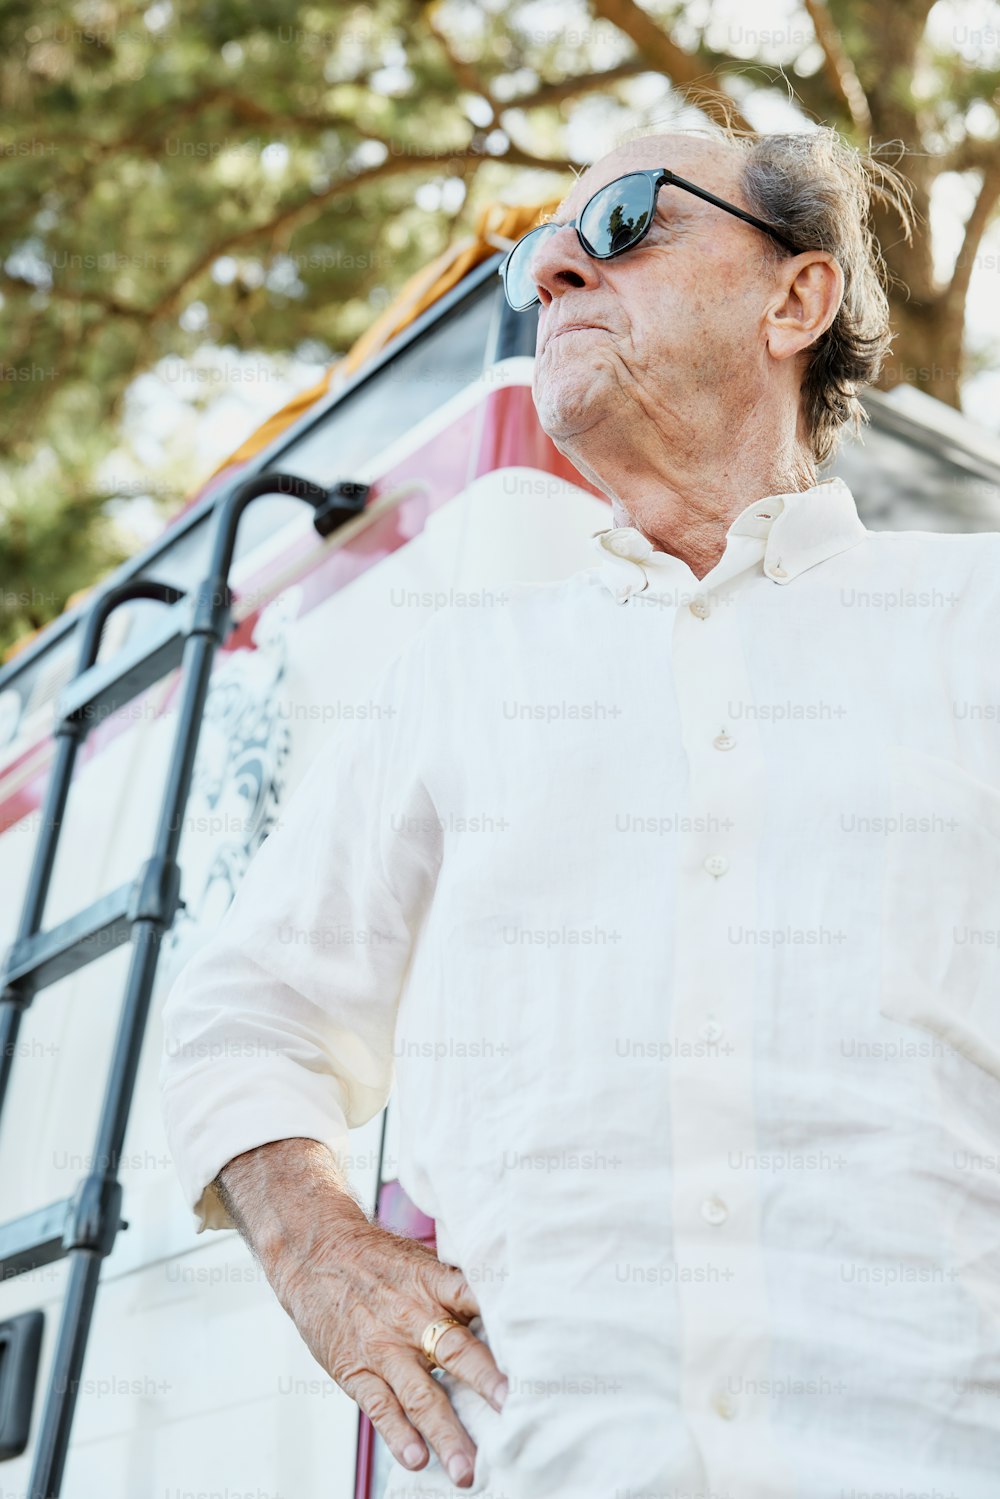 a man wearing sunglasses standing next to a truck